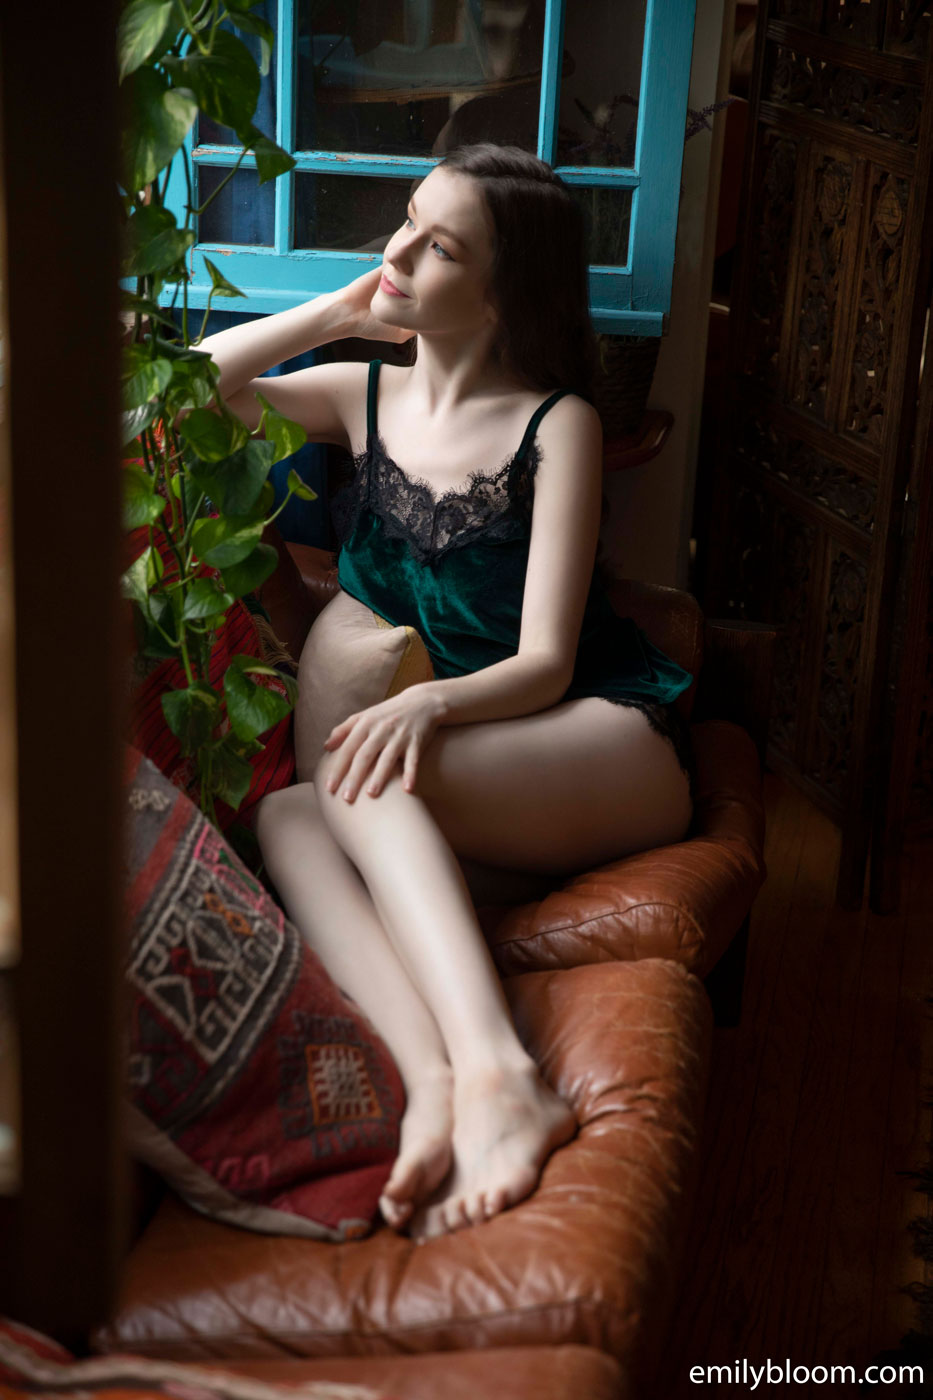 Emily Bloom by the Window